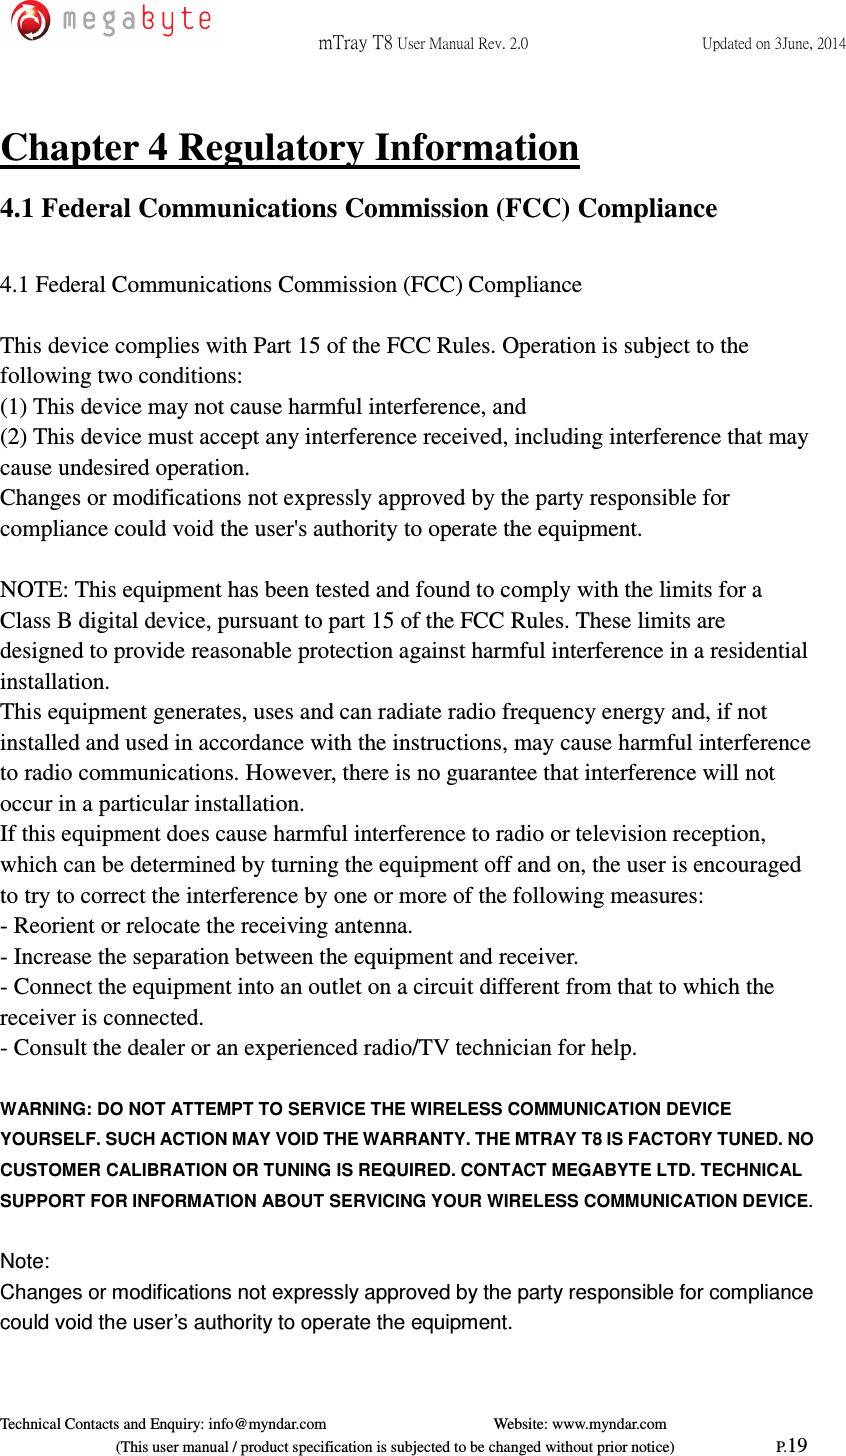  mTray T8 User Manual Rev. 2.0  Updated on 3June, 2014     Technical Contacts and Enquiry: info@myndar.com         Website: www.myndar.com                             (This user manual / product specification is subjected to be changed without prior notice)                          P.19  Chapter 4 Regulatory Information 4.1 Federal Communications Commission (FCC) Compliance  4.1 Federal Communications Commission (FCC) Compliance  This device complies with Part 15 of the FCC Rules. Operation is subject to the following two conditions: (1) This device may not cause harmful interference, and (2) This device must accept any interference received, including interference that may cause undesired operation. Changes or modifications not expressly approved by the party responsible for compliance could void the user&apos;s authority to operate the equipment.  NOTE: This equipment has been tested and found to comply with the limits for a Class B digital device, pursuant to part 15 of the FCC Rules. These limits are designed to provide reasonable protection against harmful interference in a residential installation. This equipment generates, uses and can radiate radio frequency energy and, if not installed and used in accordance with the instructions, may cause harmful interference to radio communications. However, there is no guarantee that interference will not occur in a particular installation. If this equipment does cause harmful interference to radio or television reception, which can be determined by turning the equipment off and on, the user is encouraged to try to correct the interference by one or more of the following measures: - Reorient or relocate the receiving antenna. - Increase the separation between the equipment and receiver. - Connect the equipment into an outlet on a circuit different from that to which the receiver is connected. - Consult the dealer or an experienced radio/TV technician for help.  WARNING: DO NOT ATTEMPT TO SERVICE THE WIRELESS COMMUNICATION DEVICE YOURSELF. SUCH ACTION MAY VOID THE WARRANTY. THE MTRAY T8 IS FACTORY TUNED. NO CUSTOMER CALIBRATION OR TUNING IS REQUIRED. CONTACT MEGABYTE LTD. TECHNICAL SUPPORT FOR INFORMATION ABOUT SERVICING YOUR WIRELESS COMMUNICATION DEVICE.  Note: Changes or modifications not expressly approved by the party responsible for compliance could void the user’s authority to operate the equipment.  